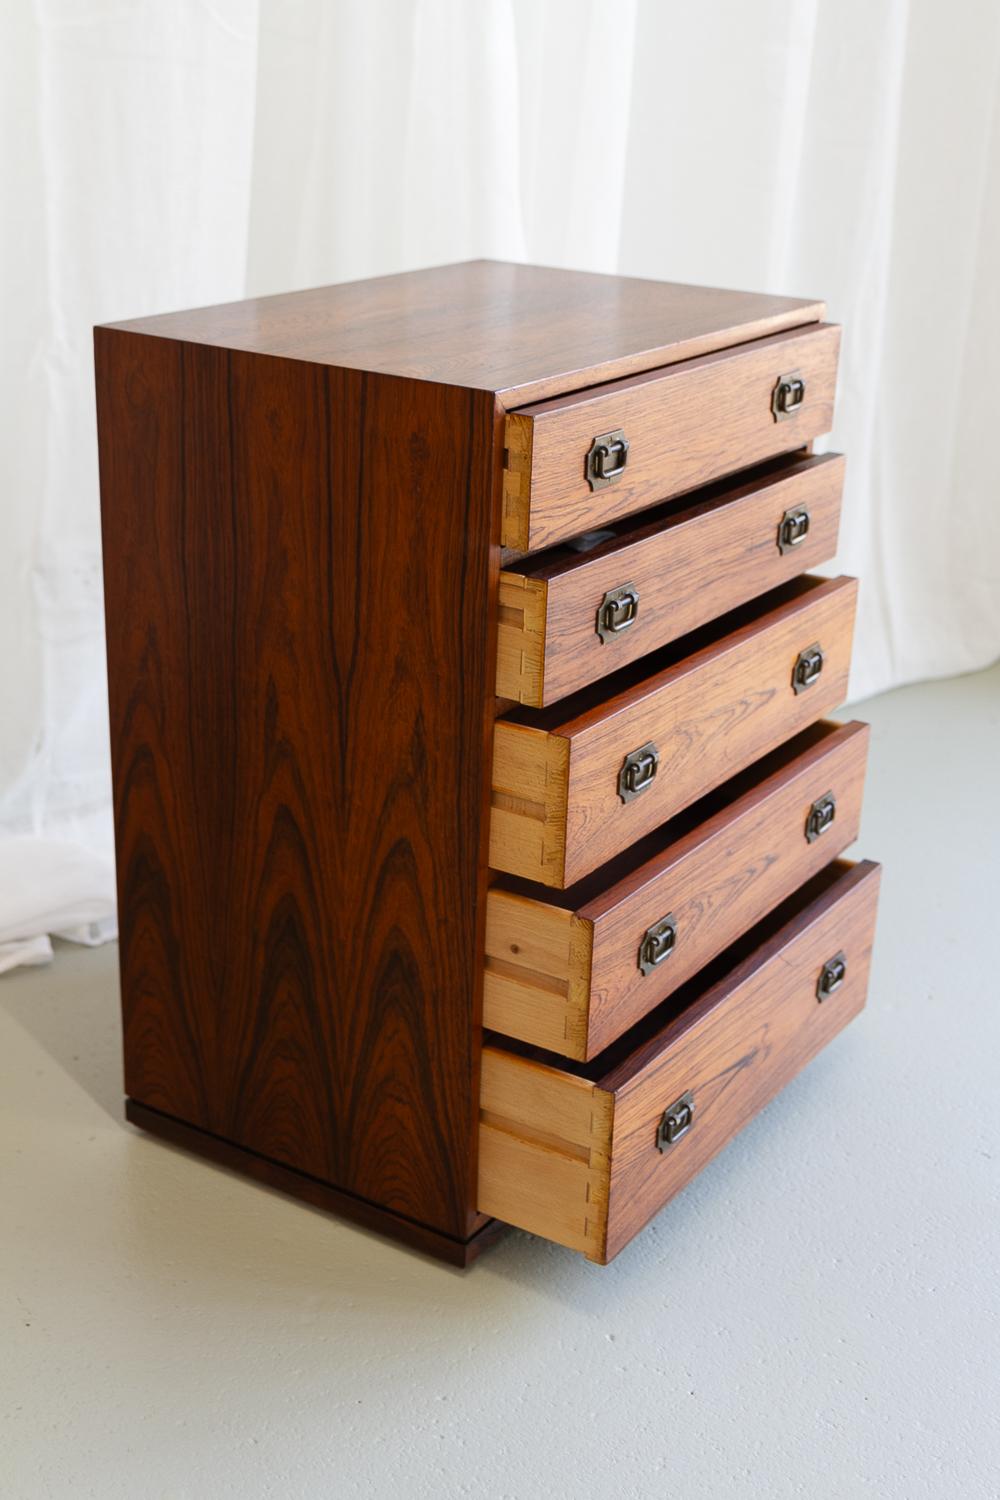 Veneer Danish Modern Rosewood Chest of Drawers by Henning Korch, 1960s. For Sale